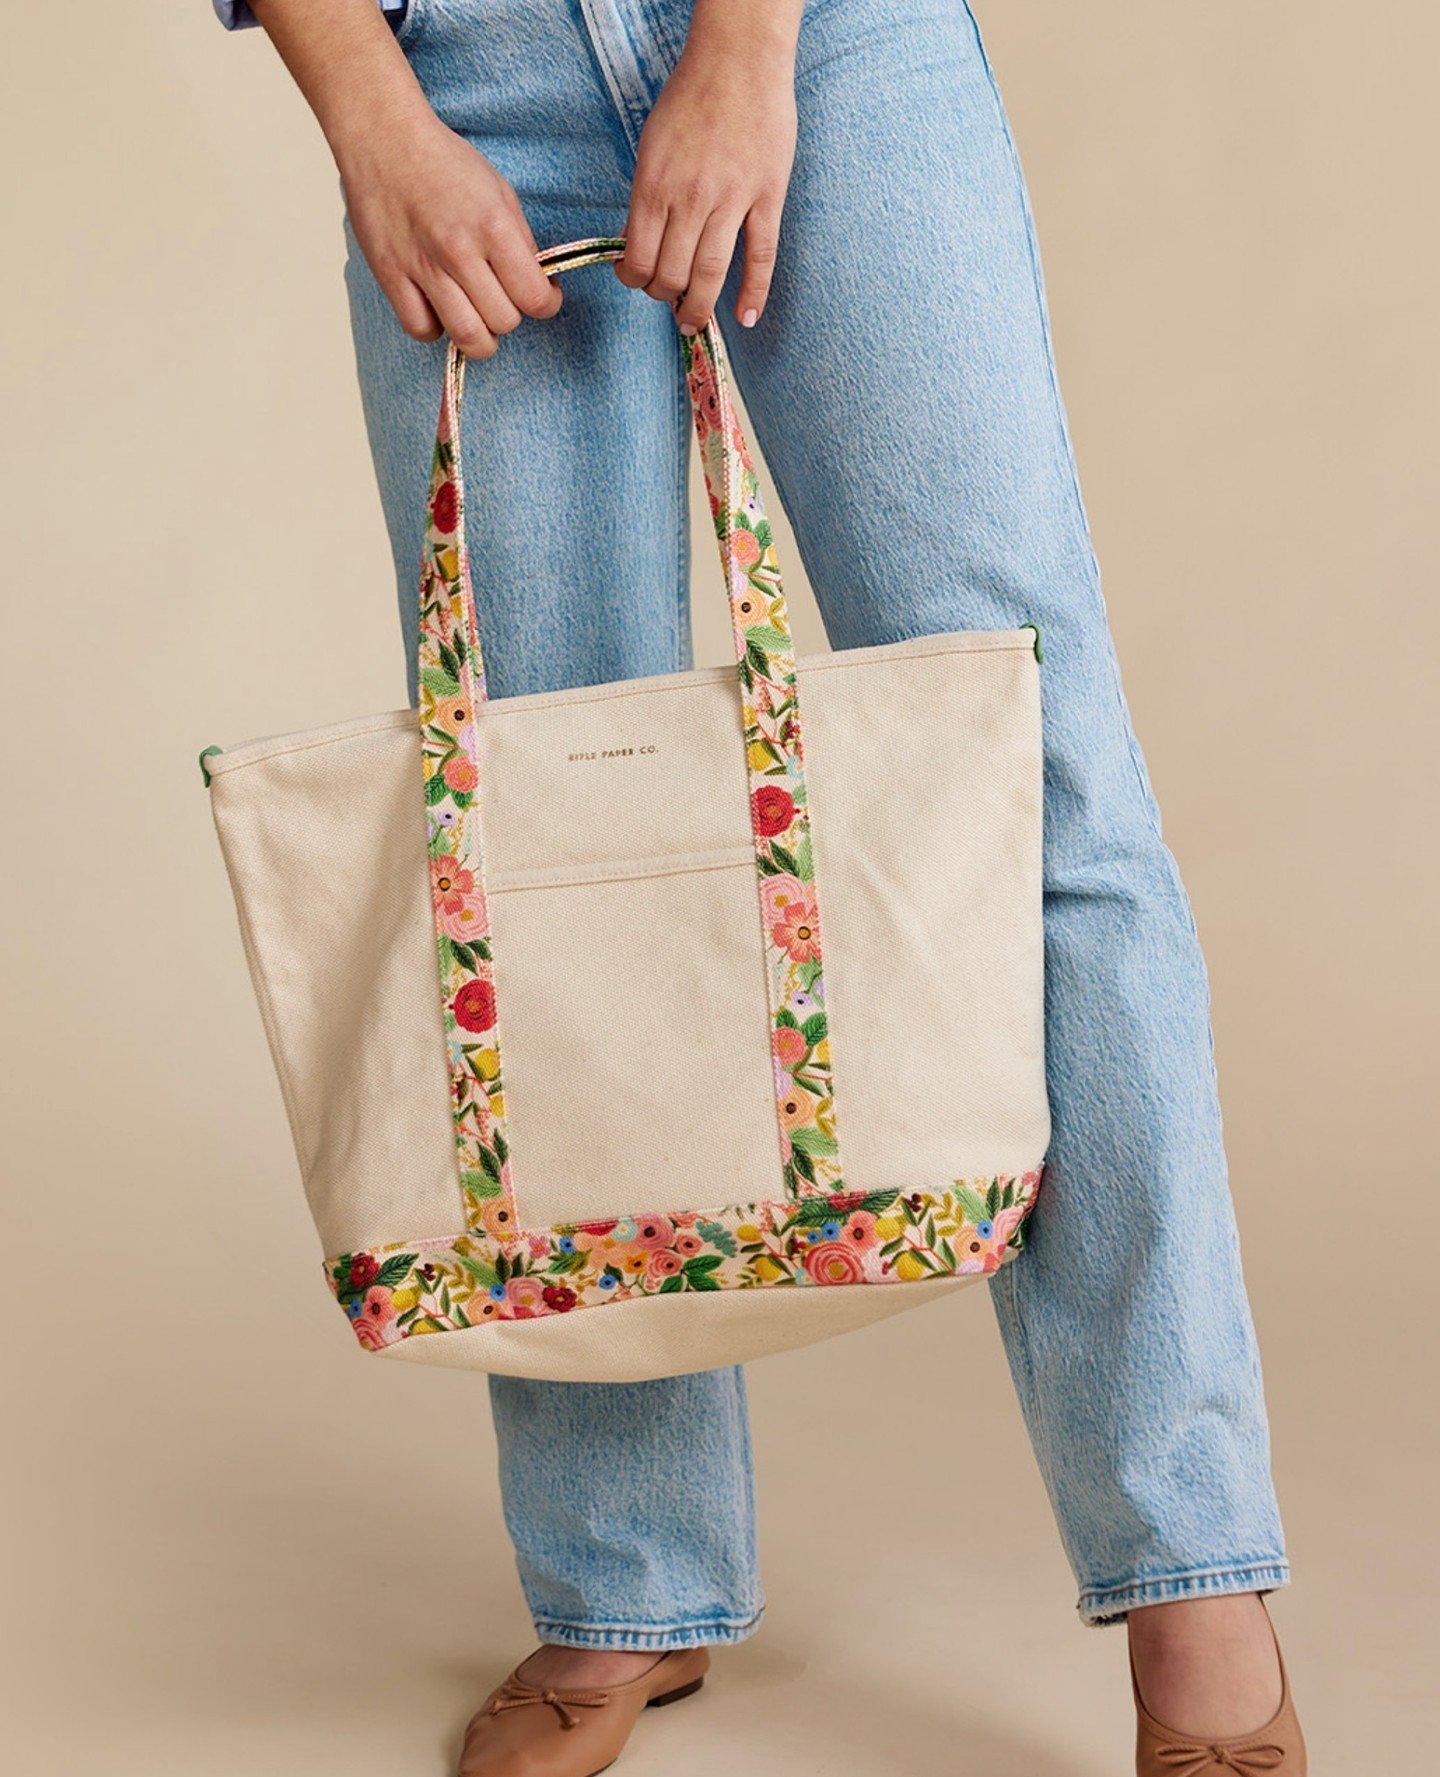 Currently Trending: The Boat Tote 🎒 is typically a heavyweight canvas bag with reinforced handles. This style of bag is currently on every It Girl's Pinterest board, and trust us when we say, we're here for it. ⁠
⁠
The Rifle Paper Co. carry all tote